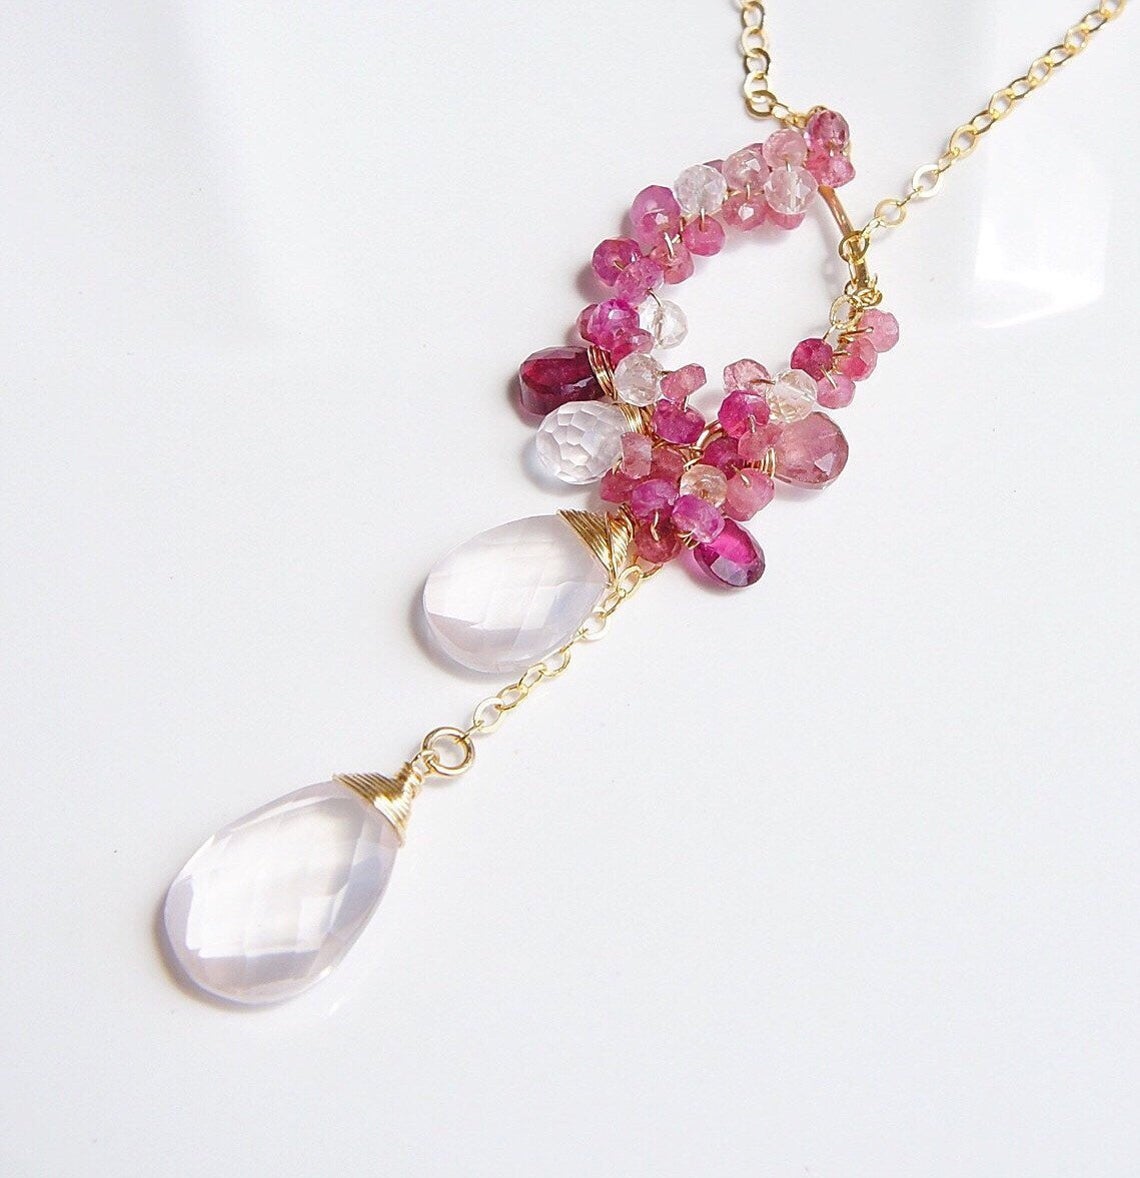 Pink tourmaline and Rose quartz Lariat Necklace in Gold filled